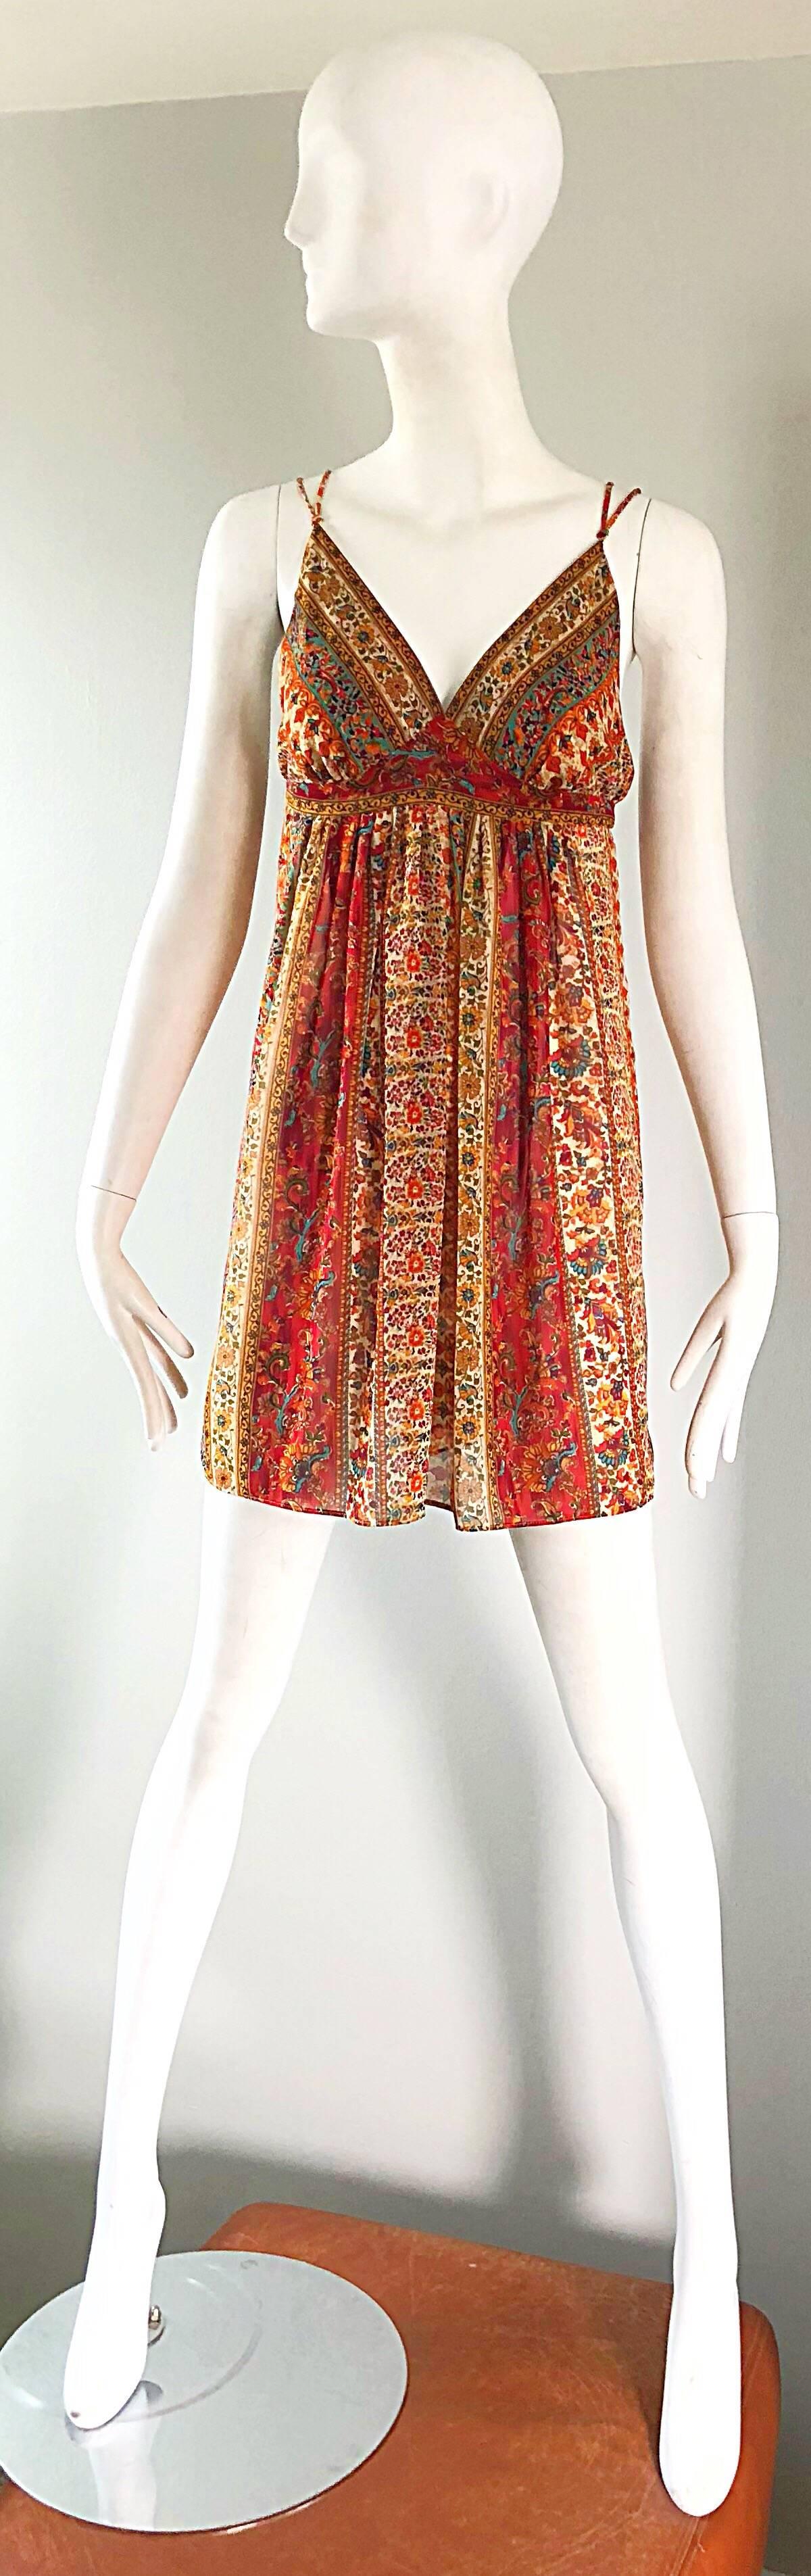 Go boho chic in this 90s OSCAR DE LA RENTA flower print empire waist spaghetti strap dress! Chic mini flower prints in warm tones of rust red, yellow, turquoise blue, orange and ivory throughout. Double spaghetti strap, Simply slips over the head.